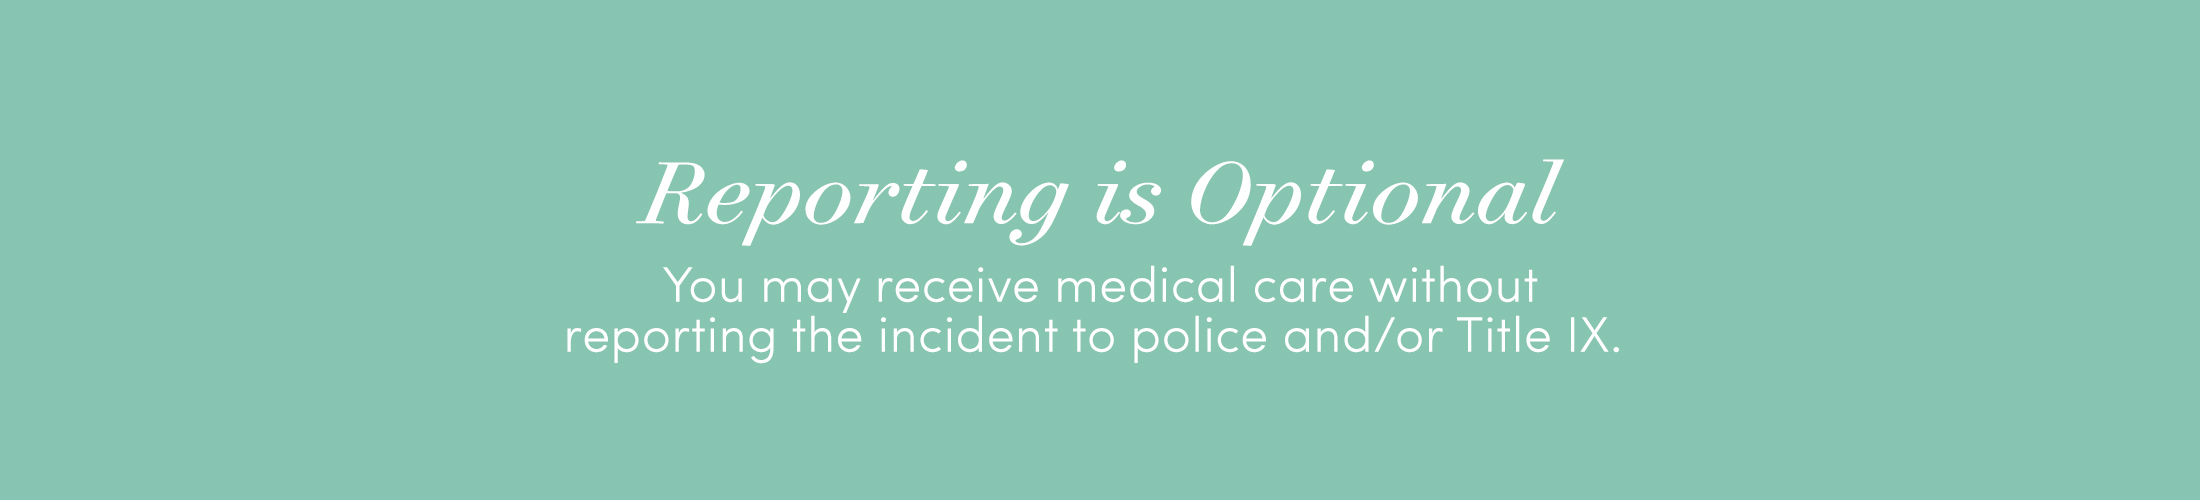 Reporting is Optional You may receive medical care without reporting the incident to police.